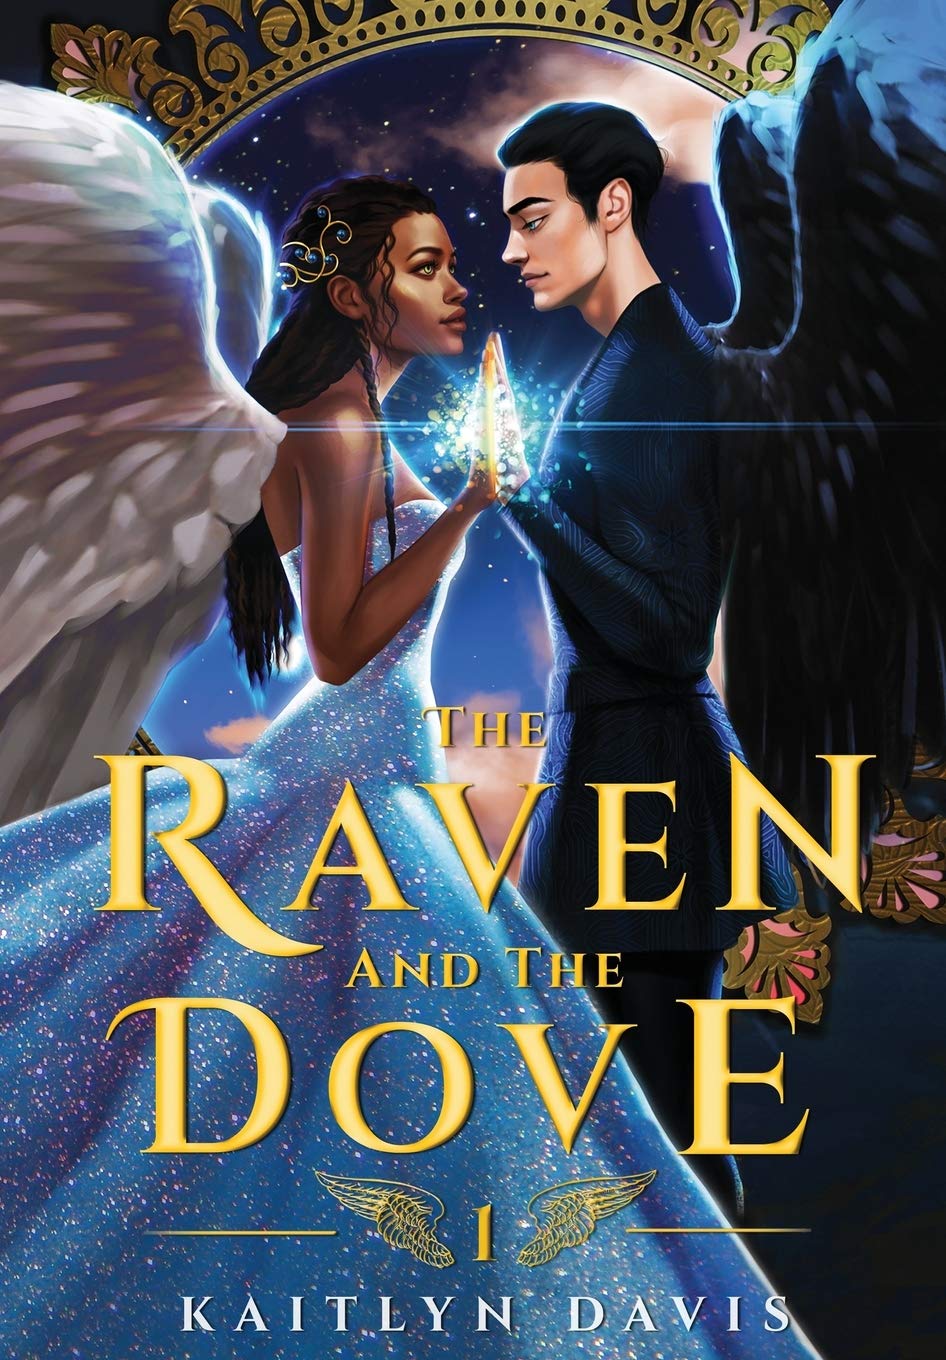 The Raven and the Dove (The Raven and the Dove #1) (Audiobook) by